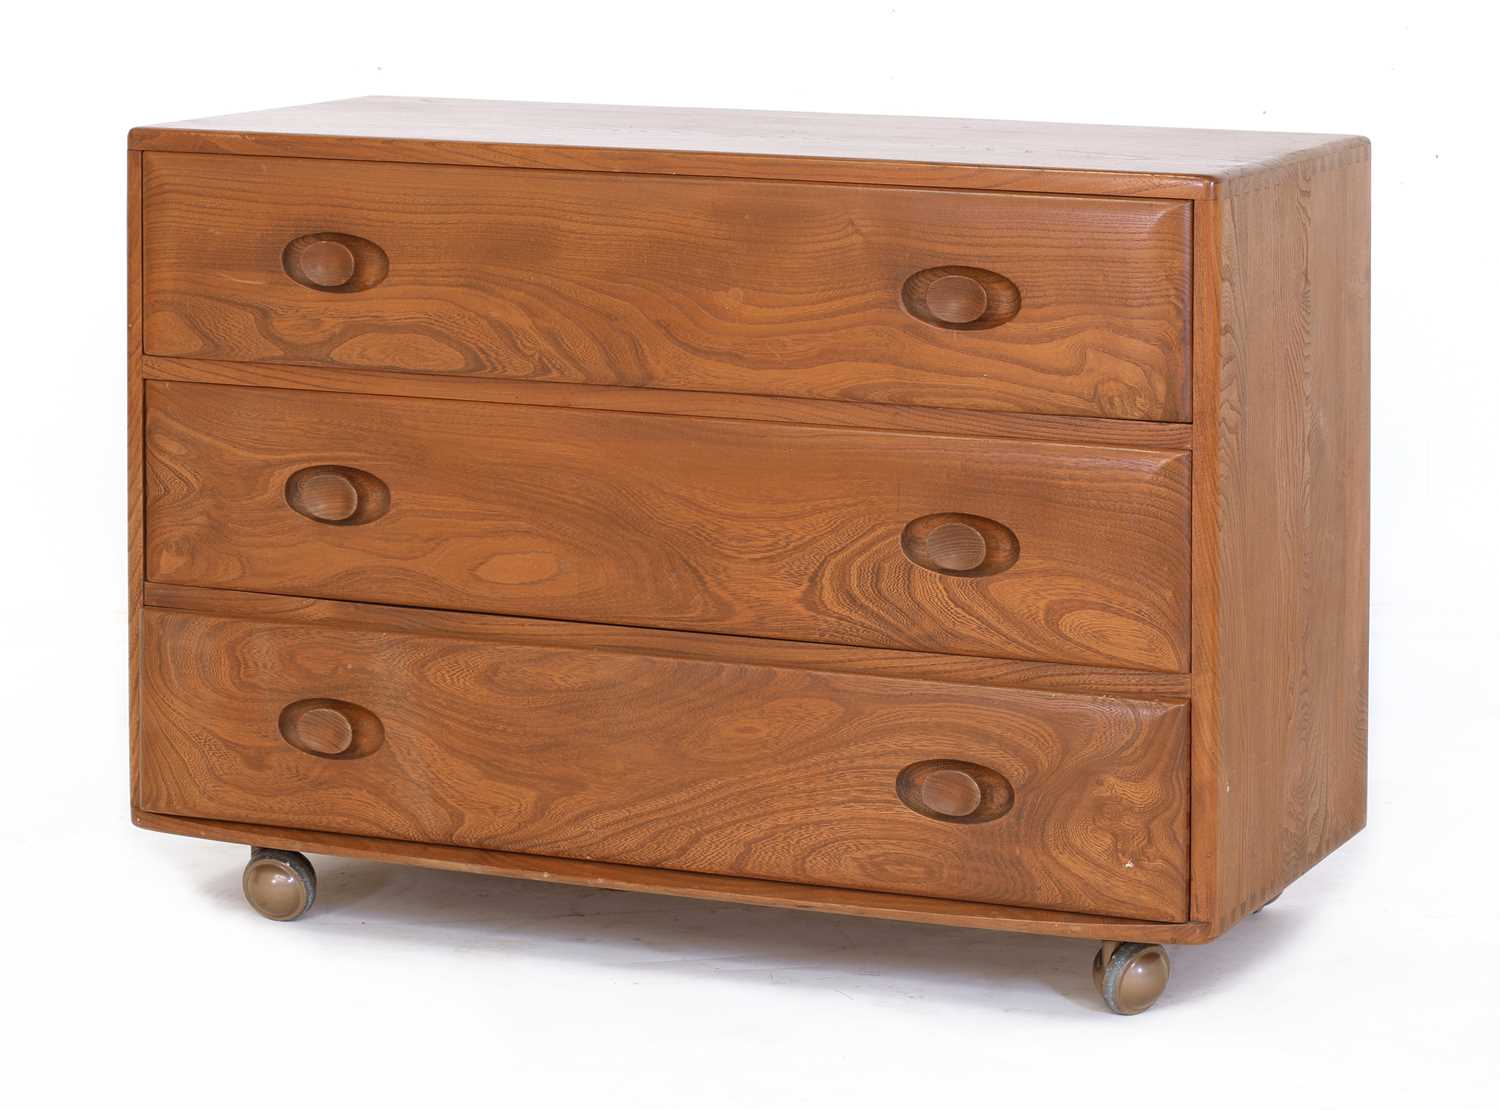 Lot 312 - An Ercol elm 'Windsor' chest of drawers